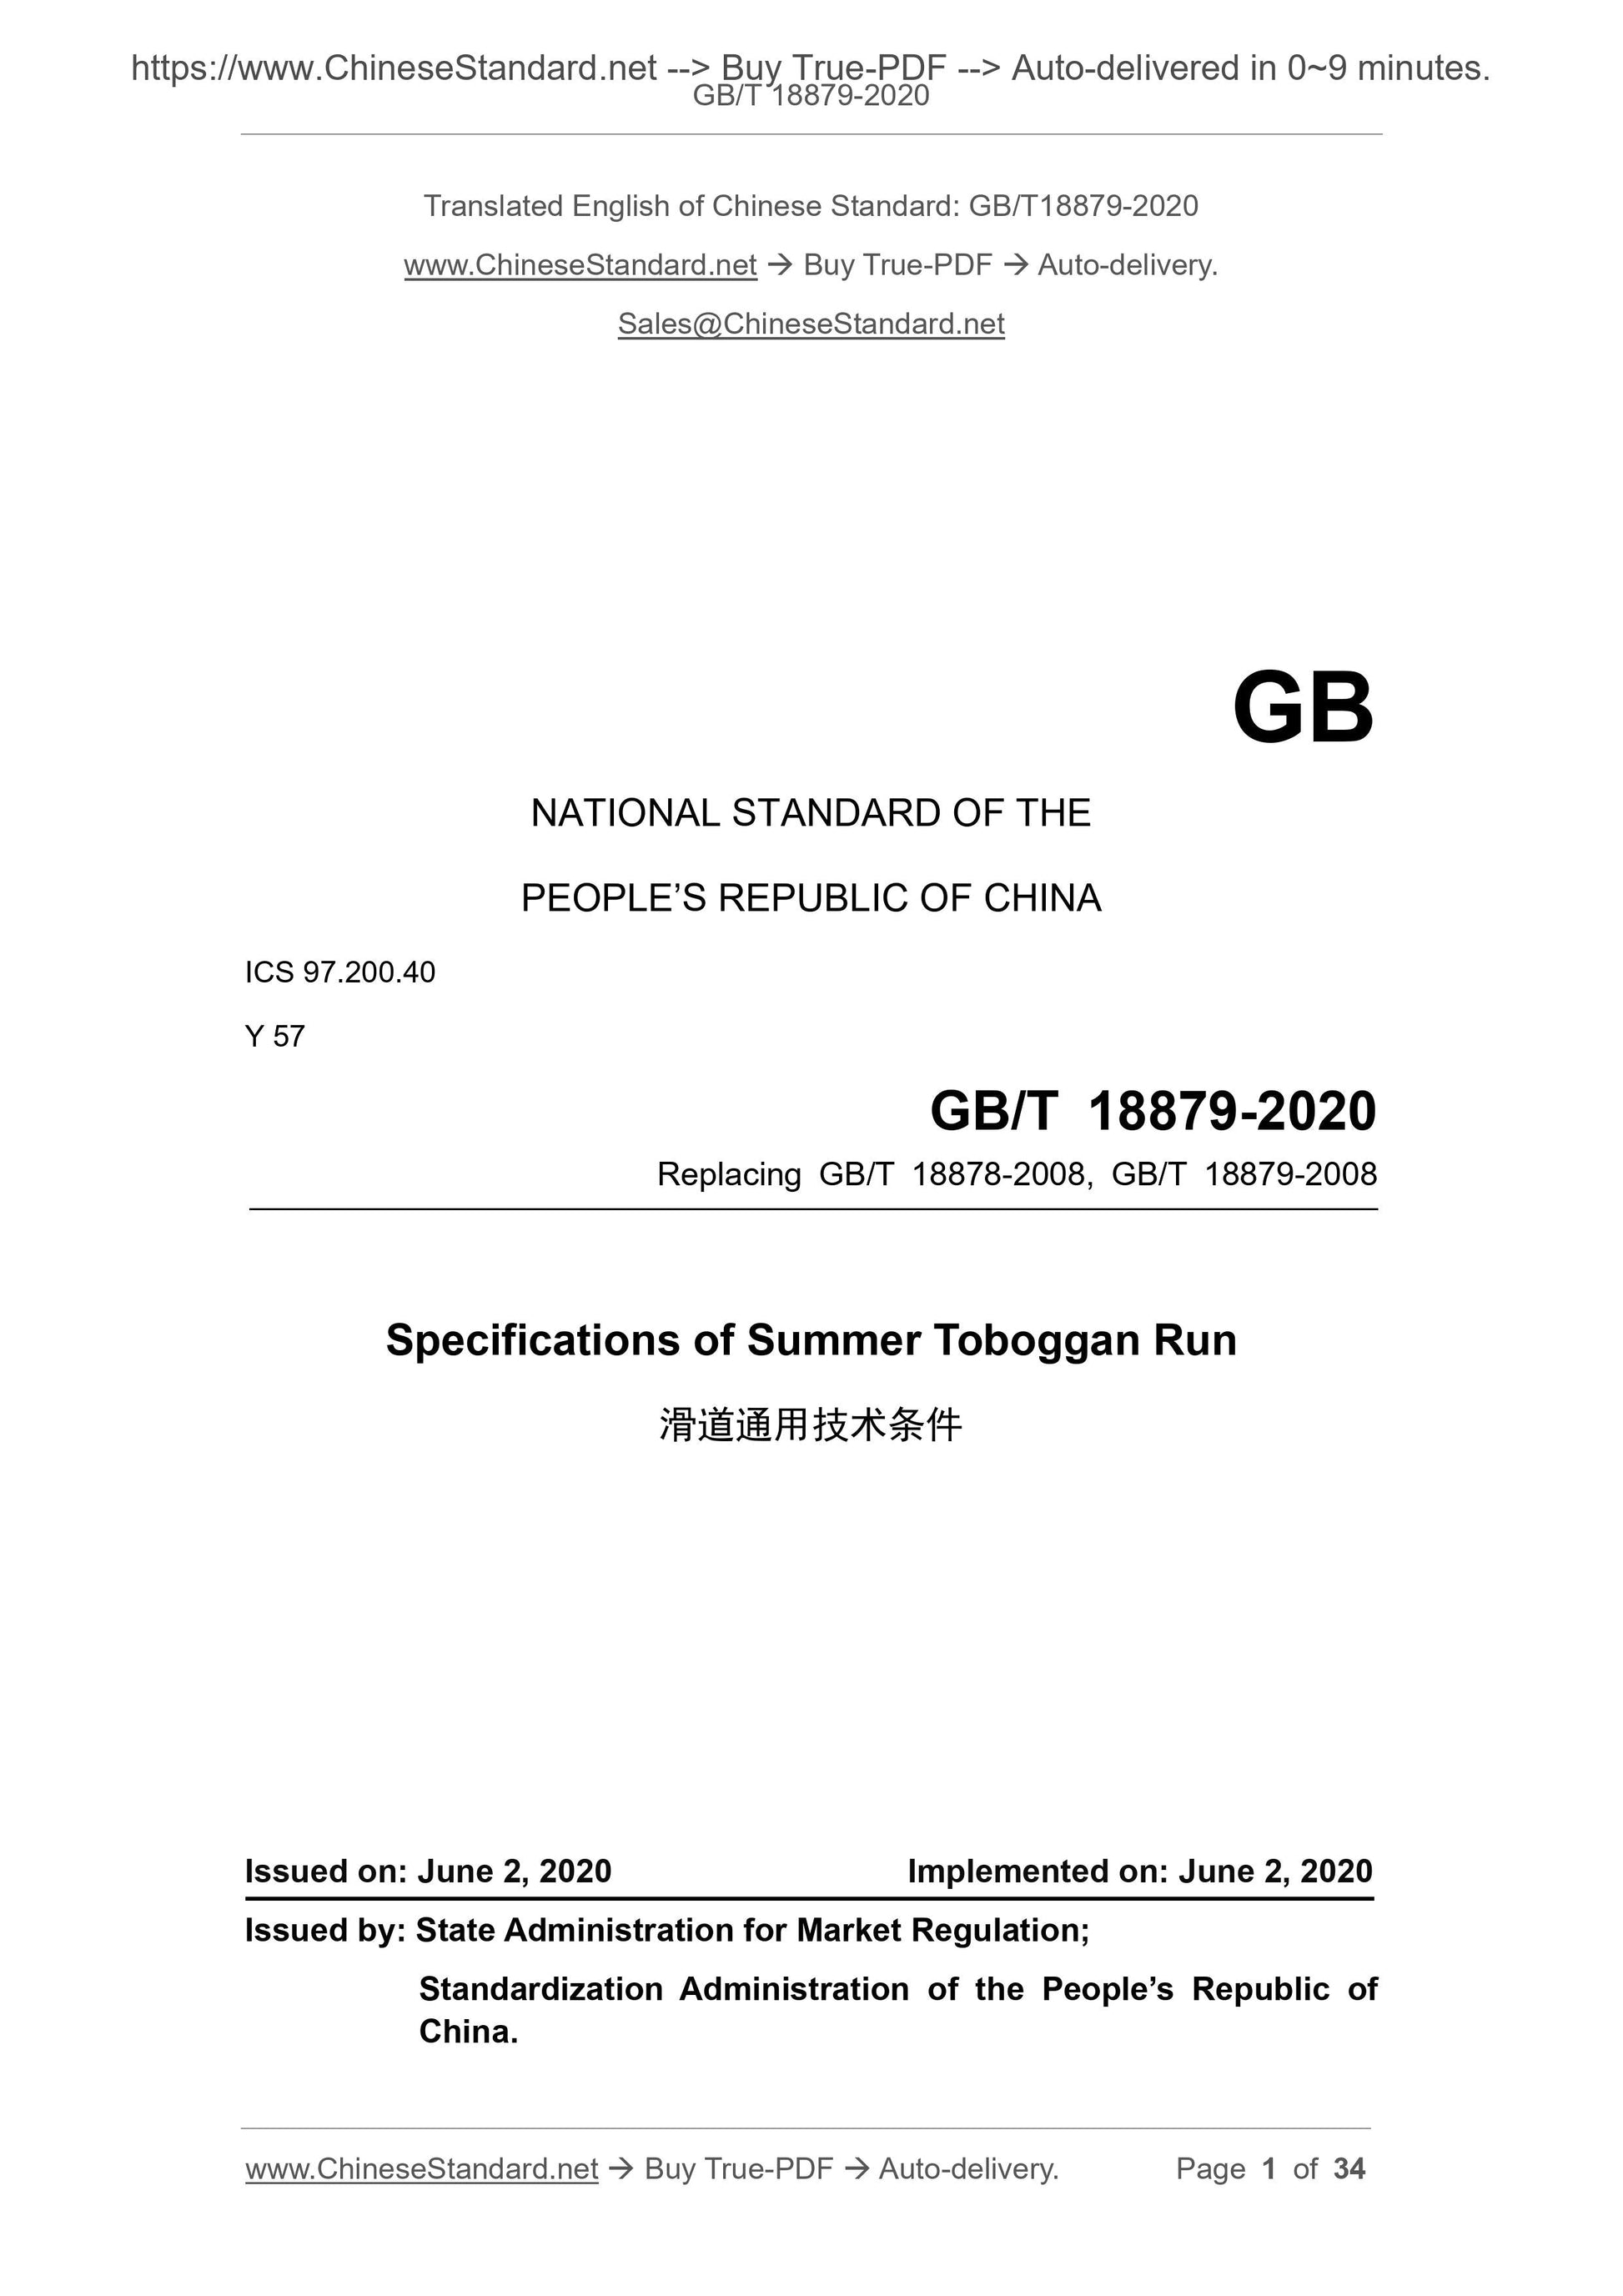 GB/T 18879-2020 Page 1